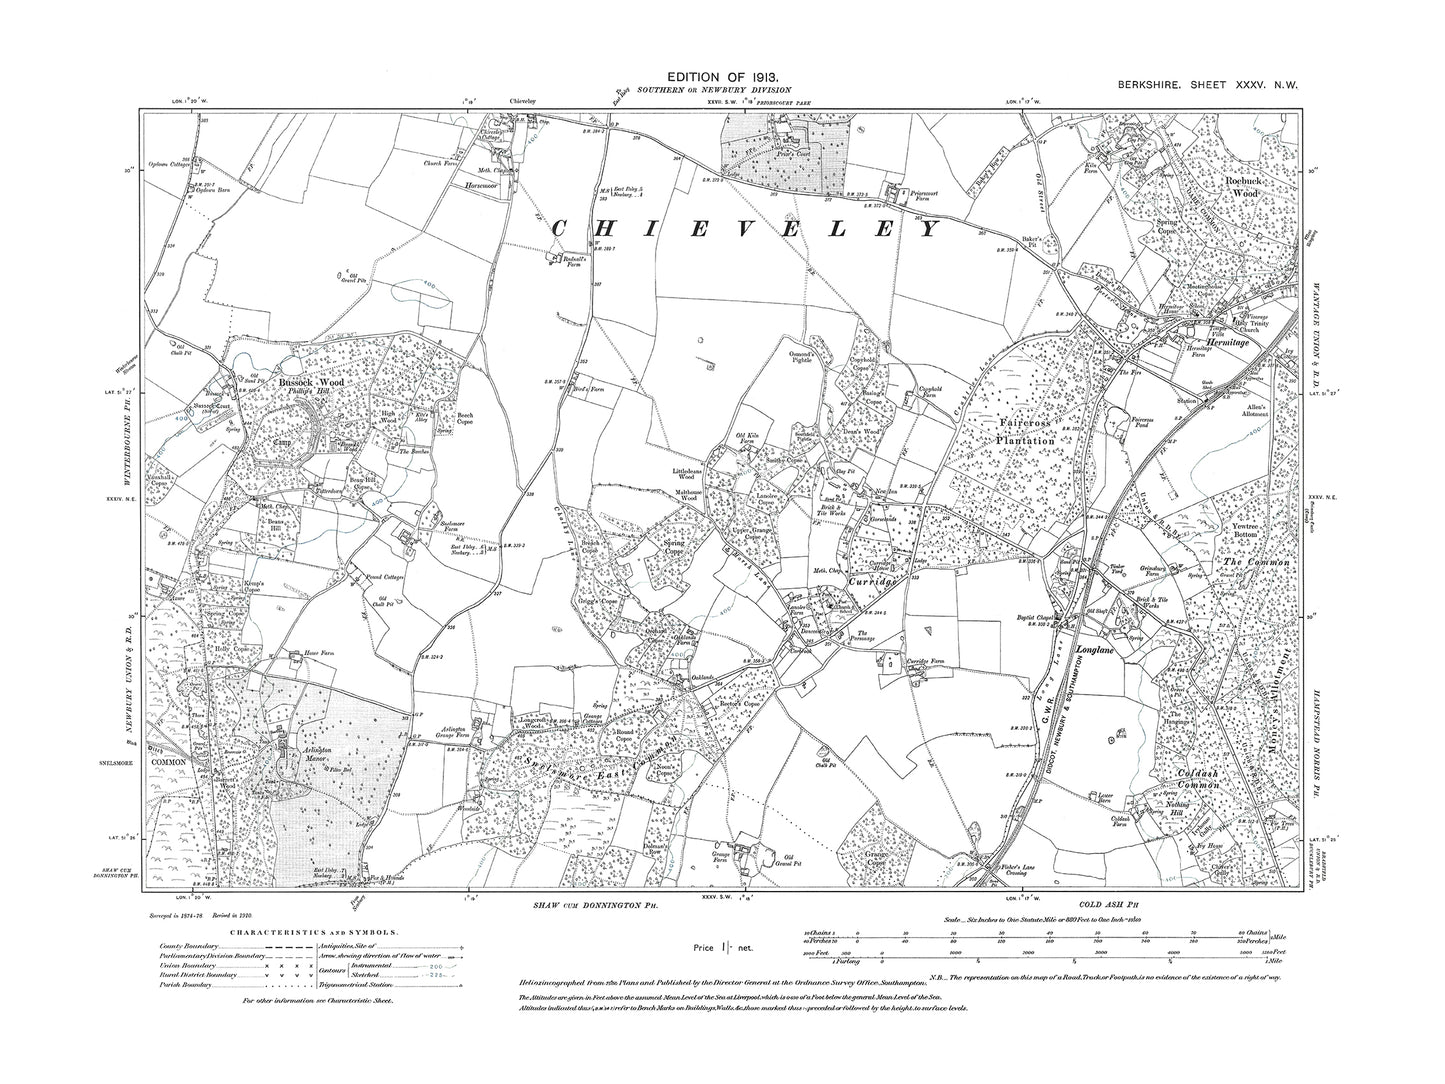 A 1913 map showing Curridge, Longlane in Berkshire - OS 1:10560 scale map, Berks 35NW